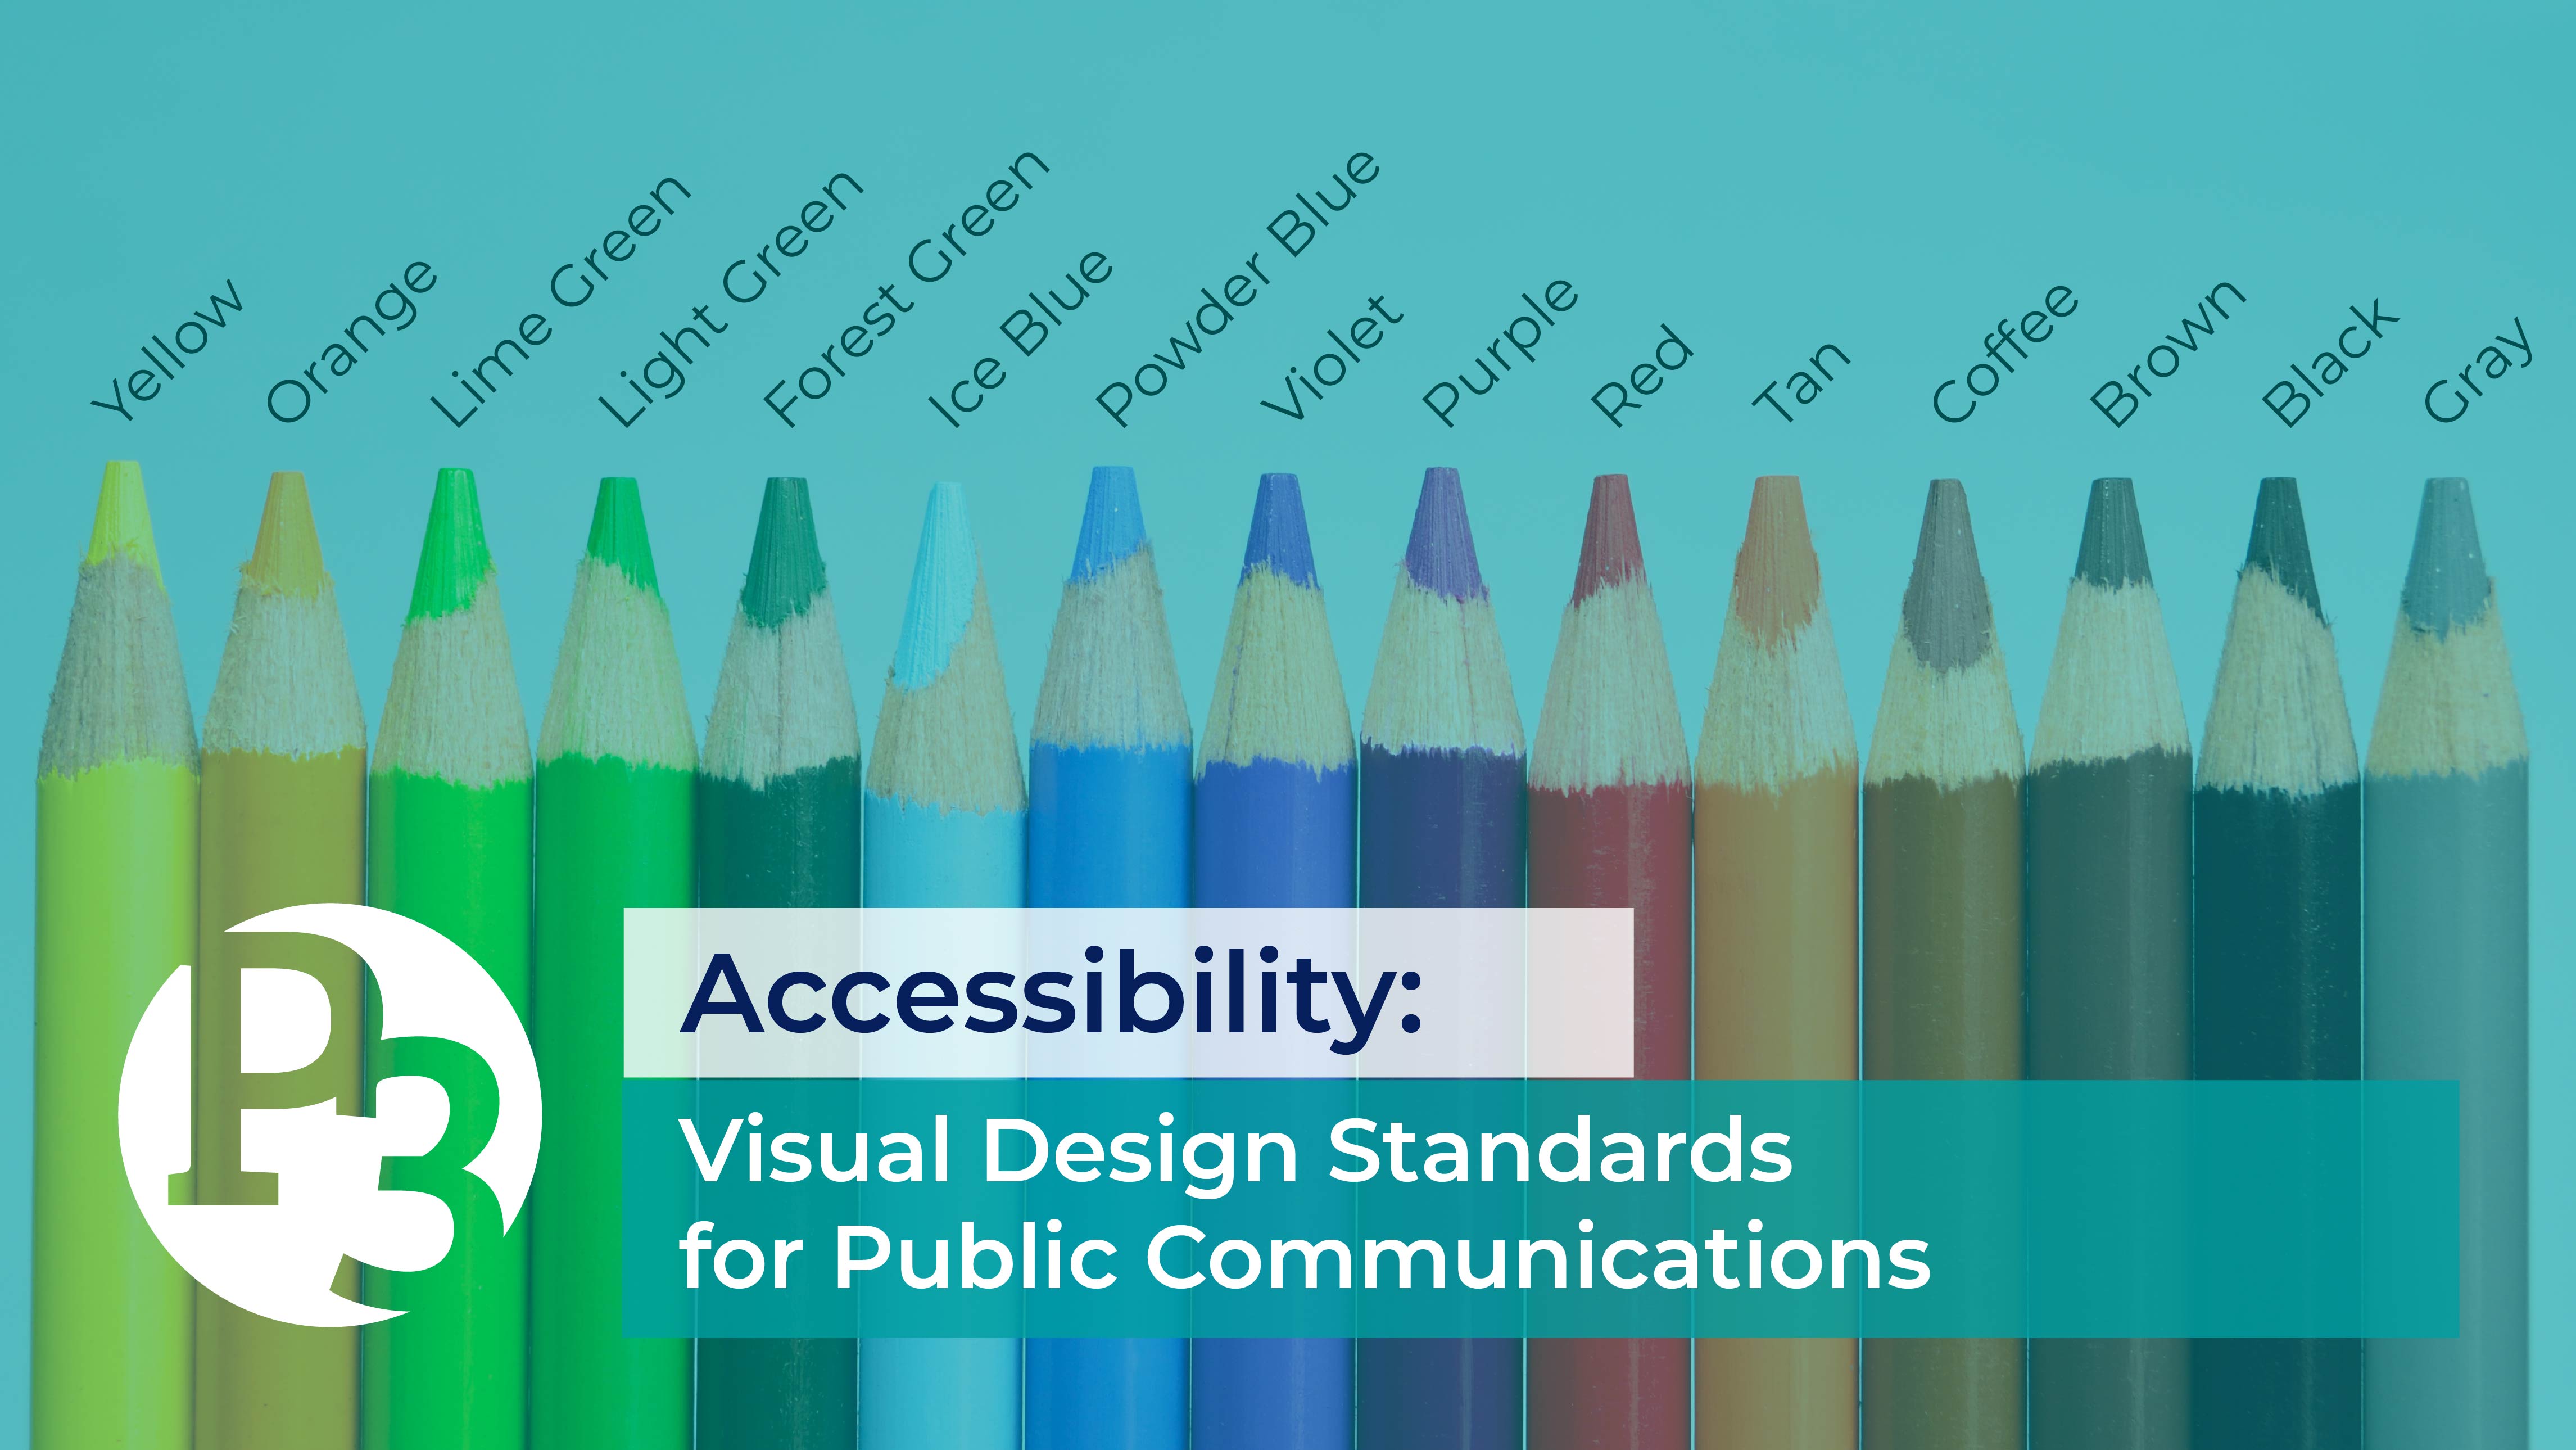 Accessibility: Visual Design Standards for Public Communications